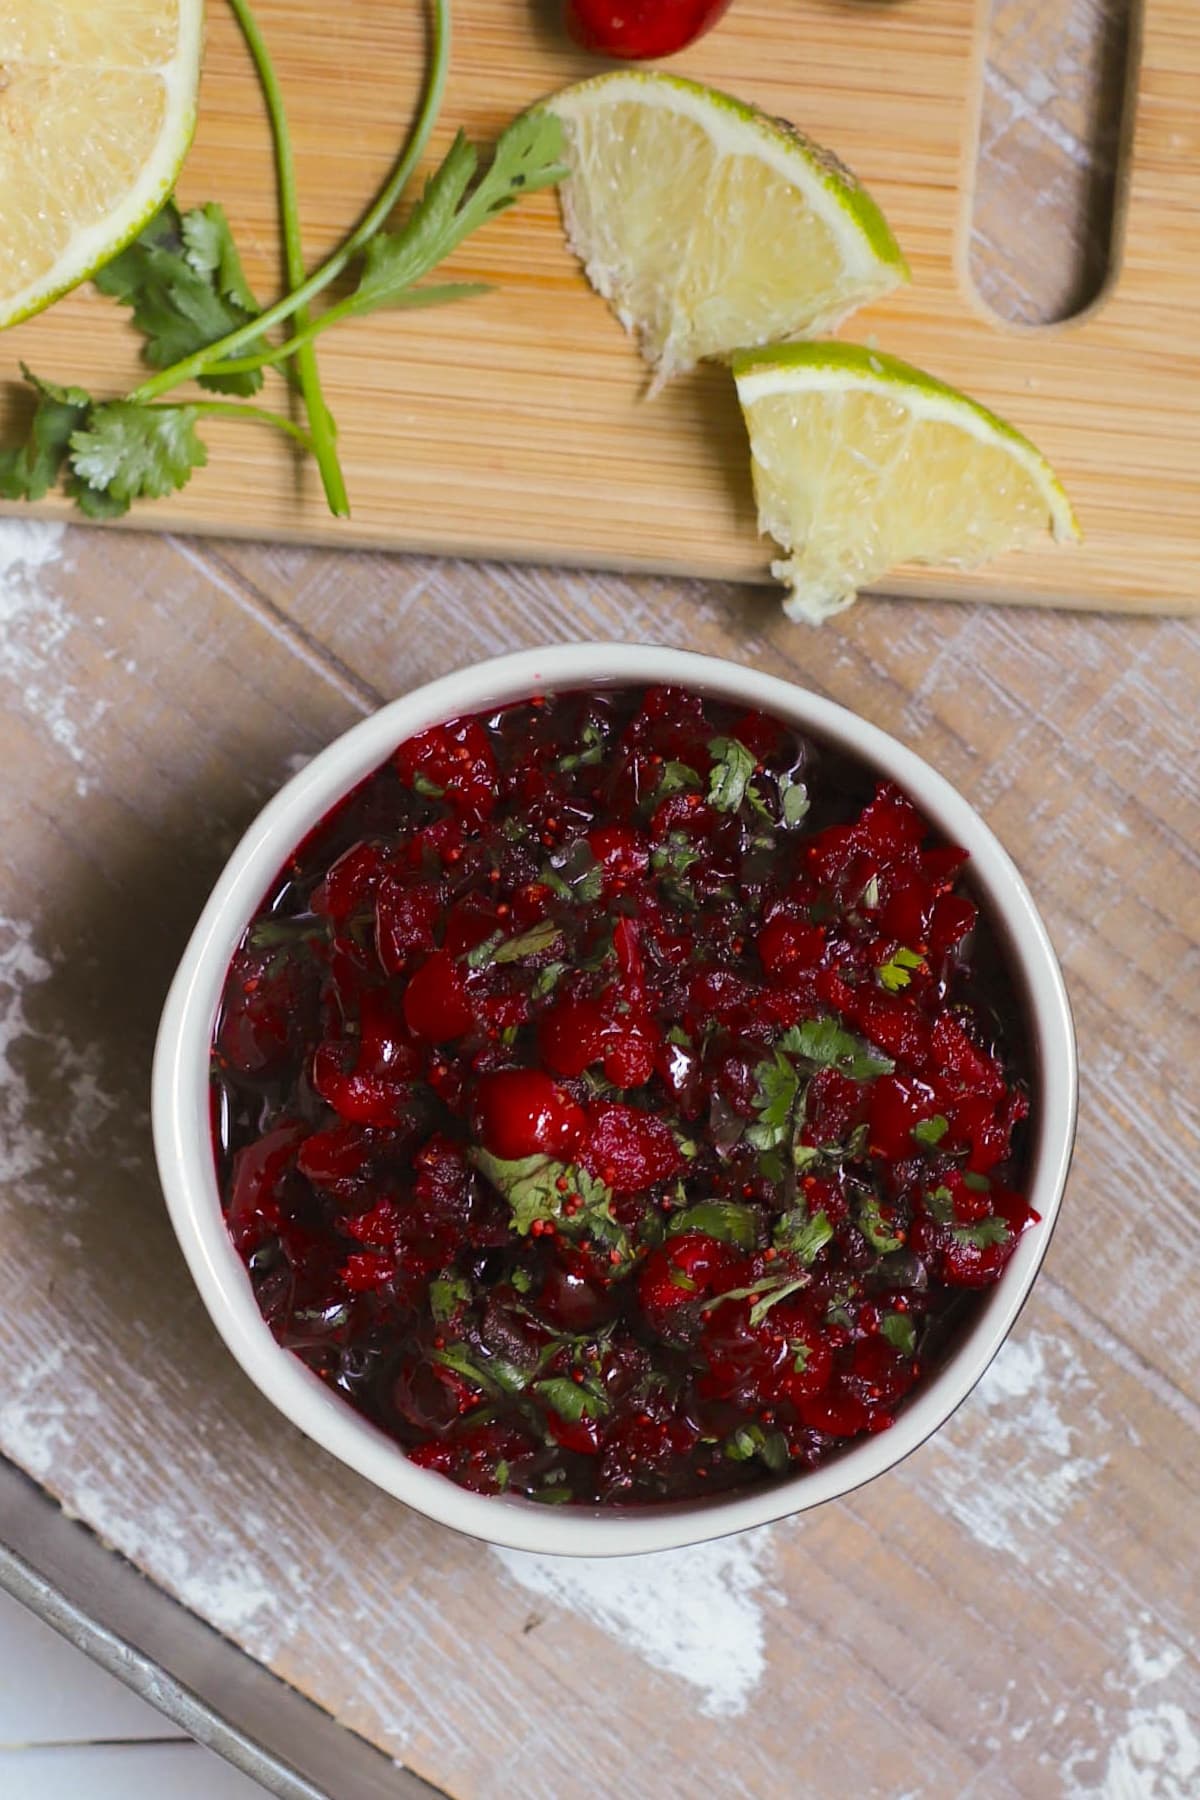 Cranberry salsa with limes